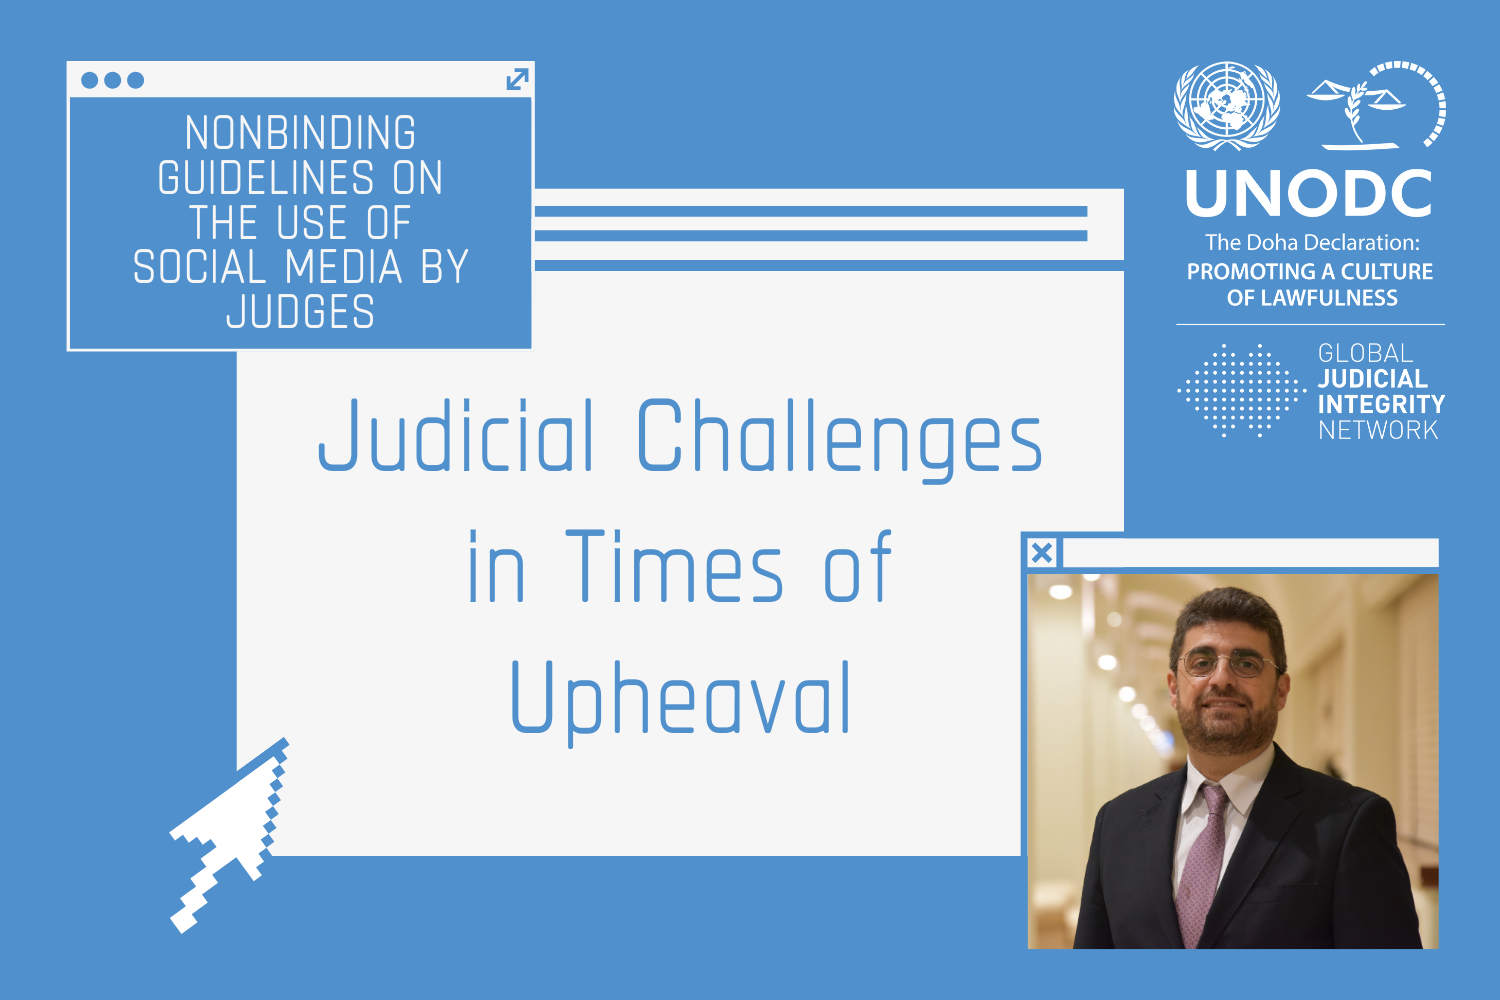 Judicial challenges in times of upheaval